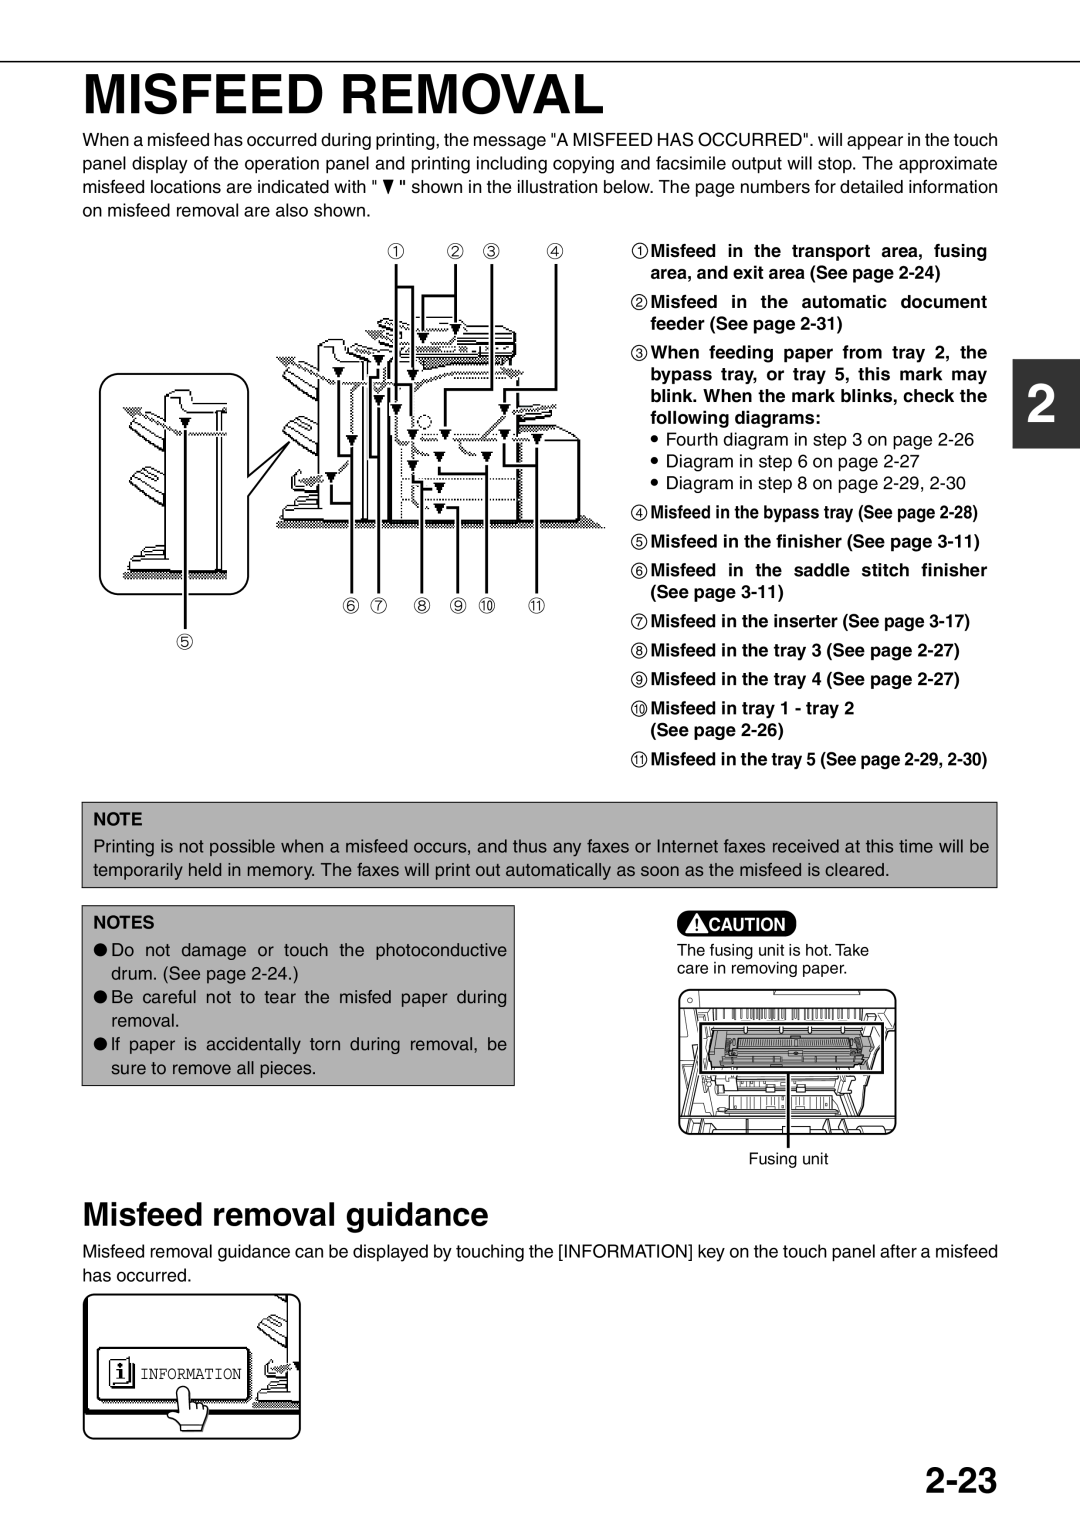 Sharp MX-M620U Misfeed Removal, 2-23, Misfeed removal guidance, Misfeed in the automatic document feeder See page 